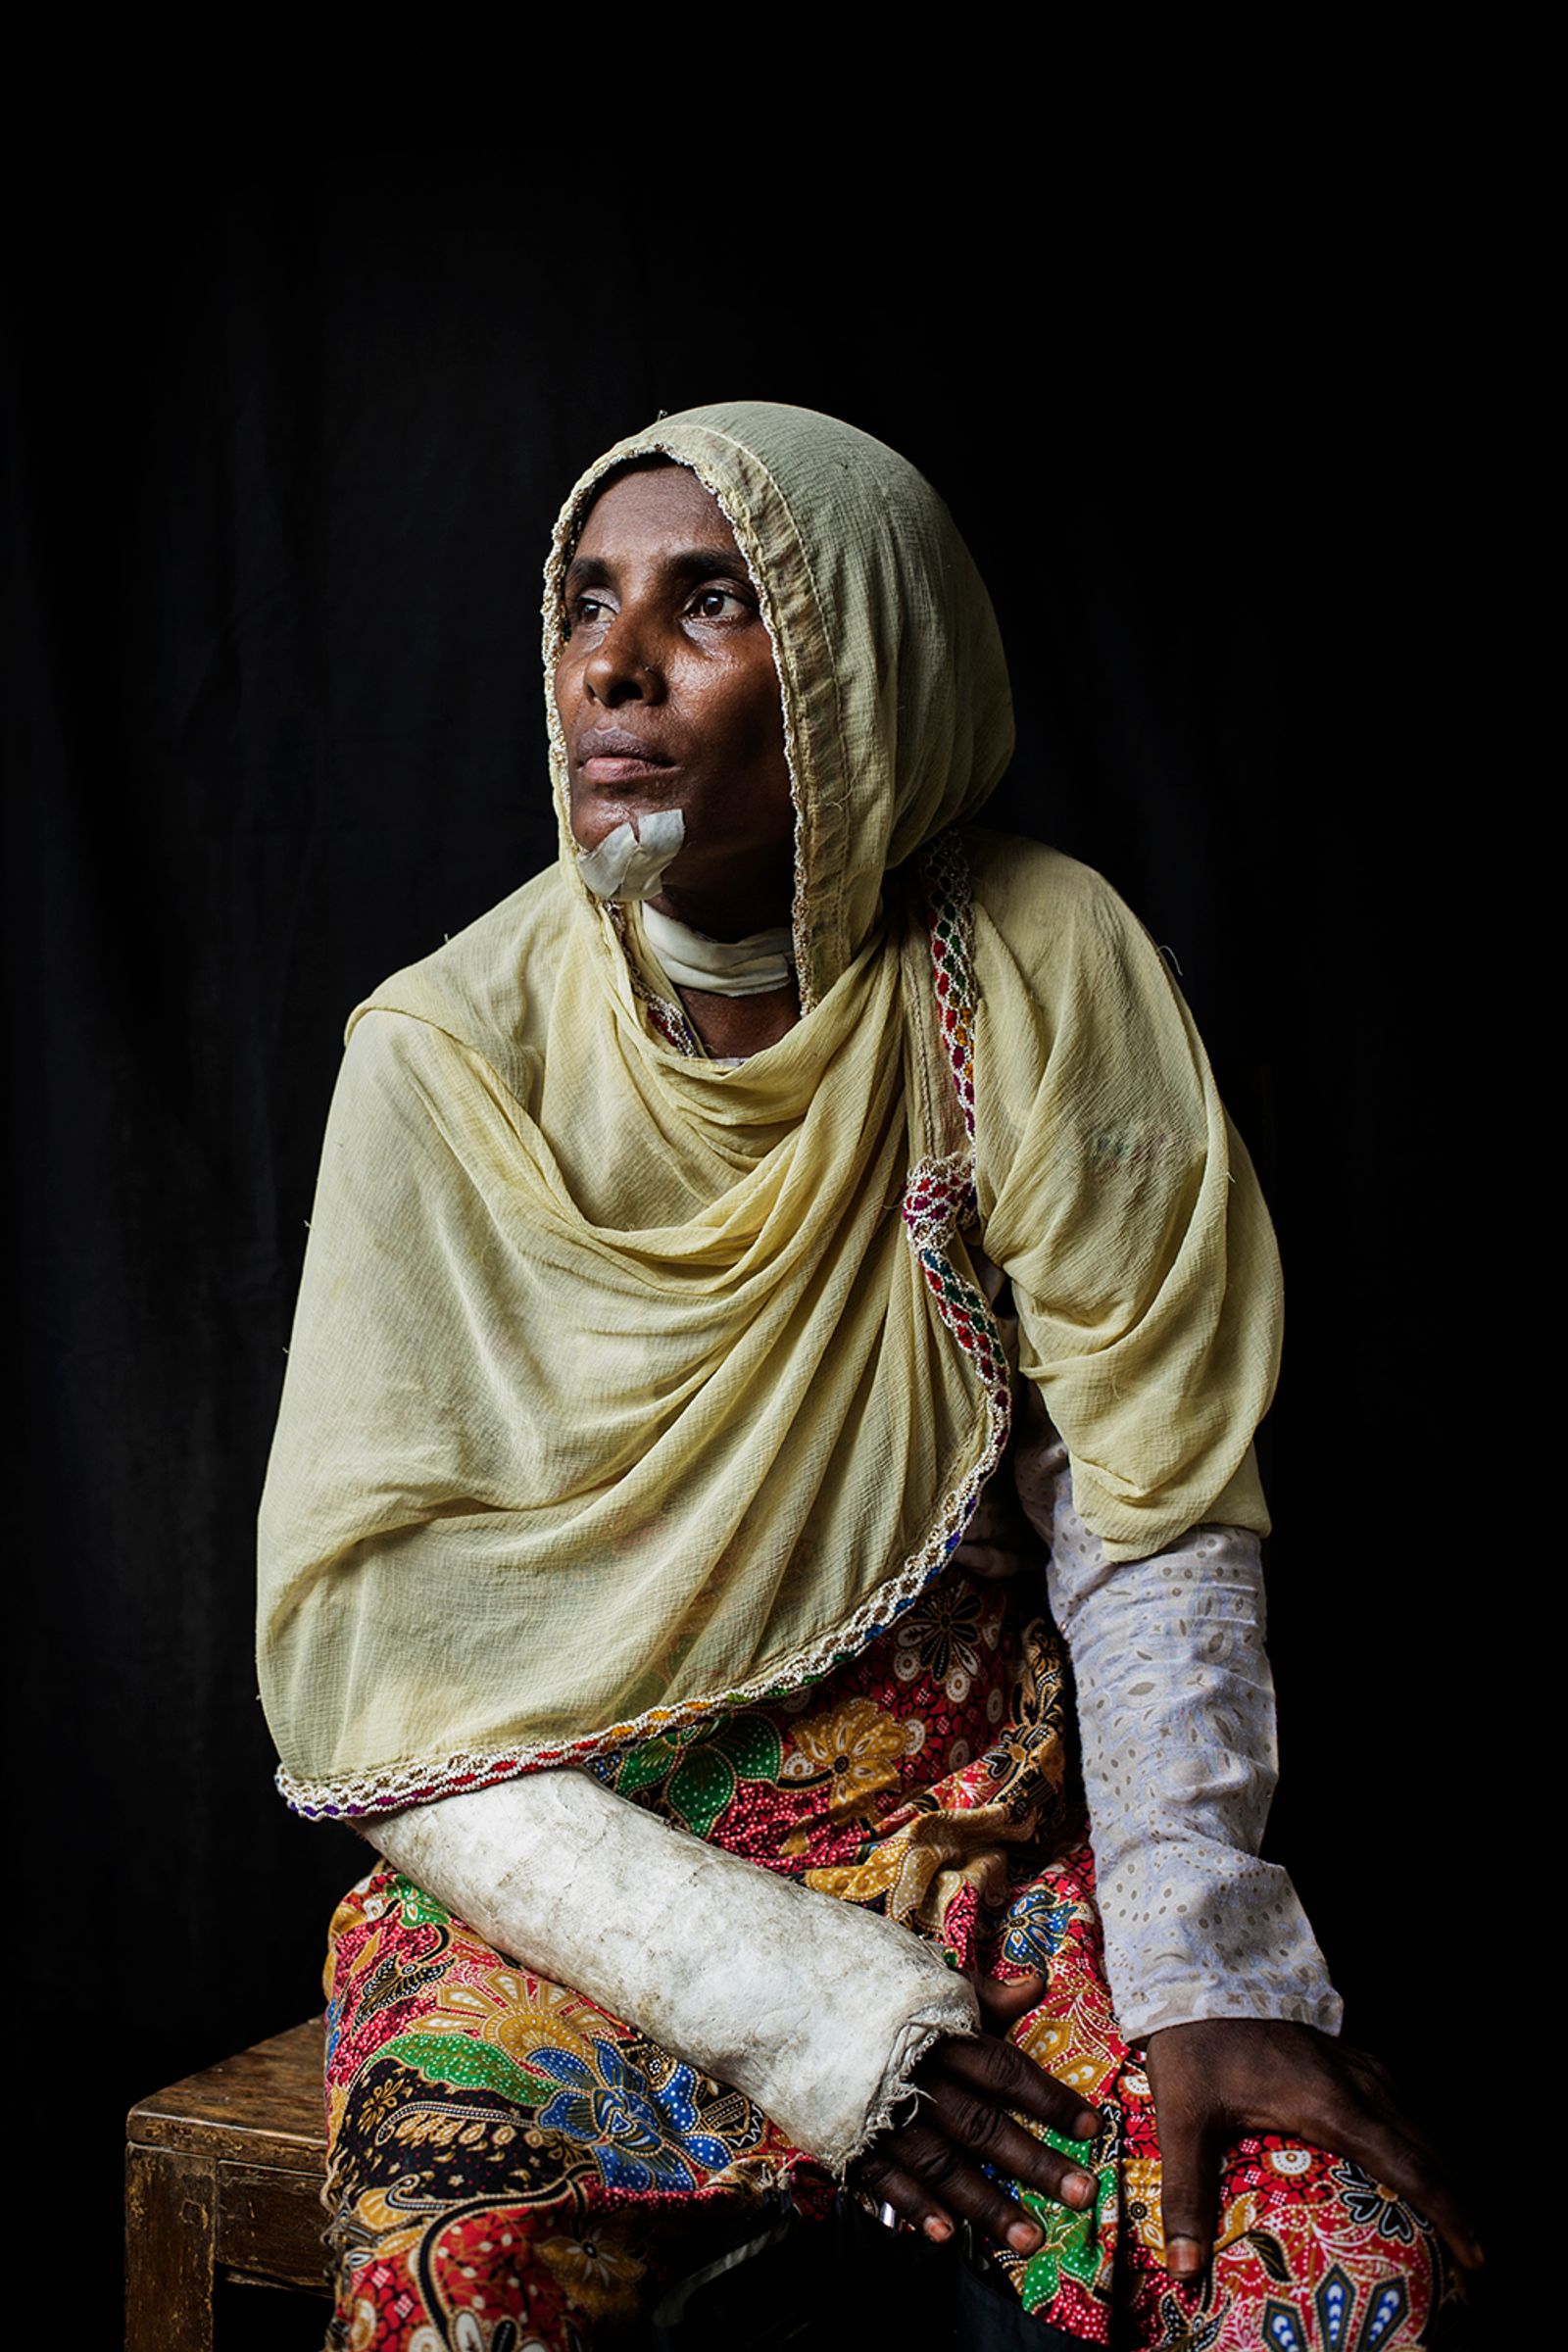 © Anastasia Taylor Lind - Image from the Rohingya Massacre survivors photography project